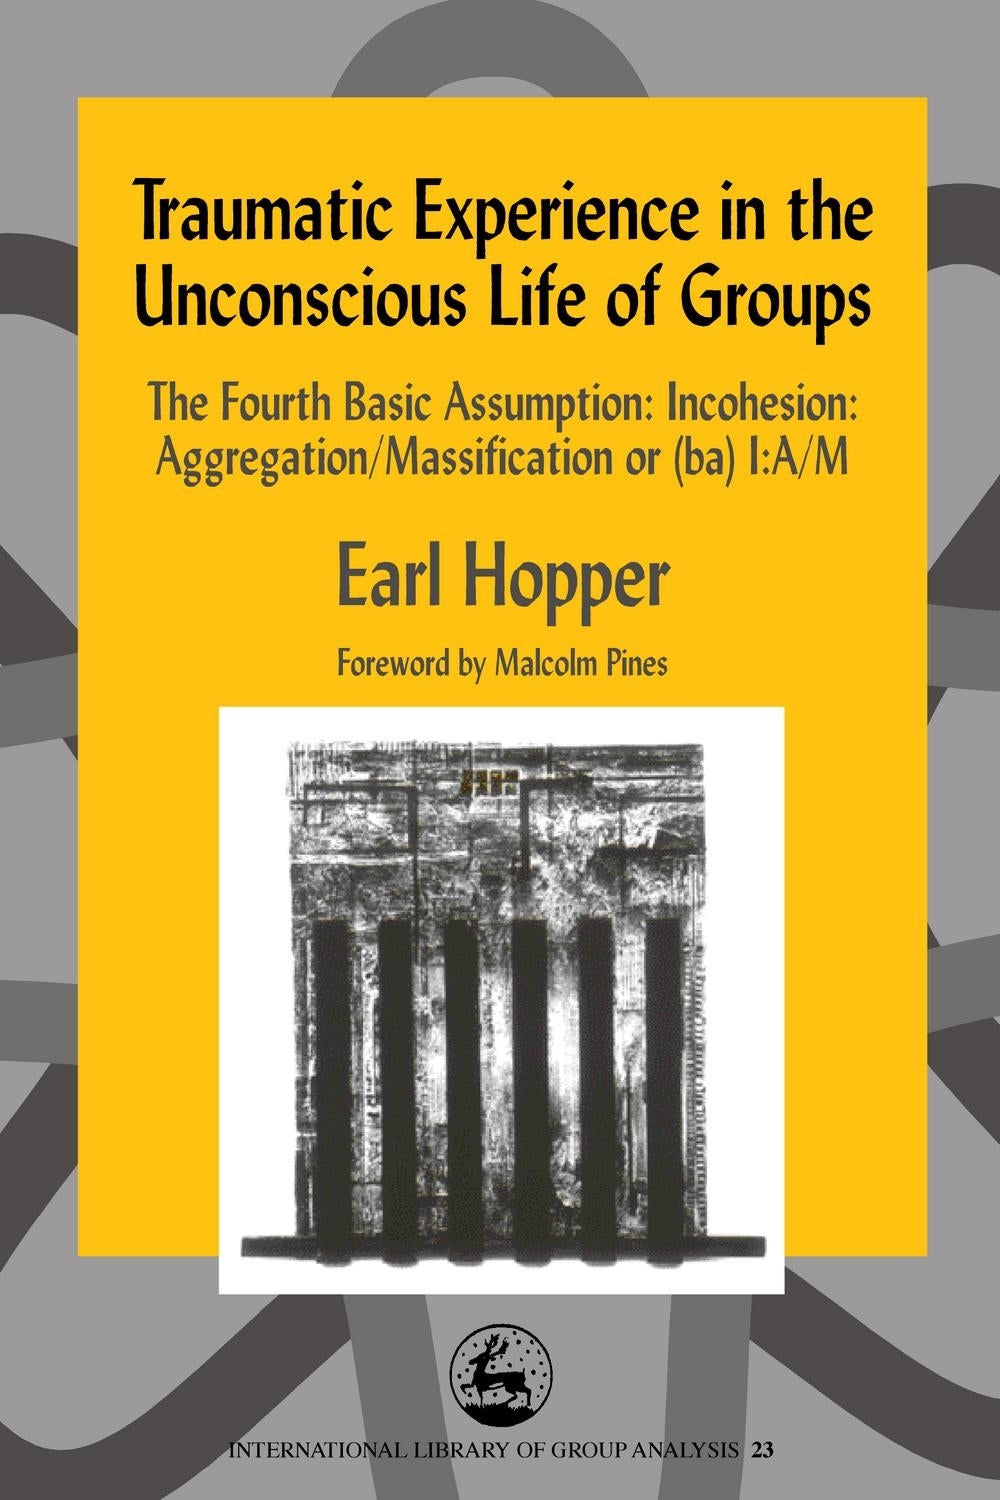 Traumatic Experience in the Unconscious Life of Groups by Malcolm Pines, Earl Hopper